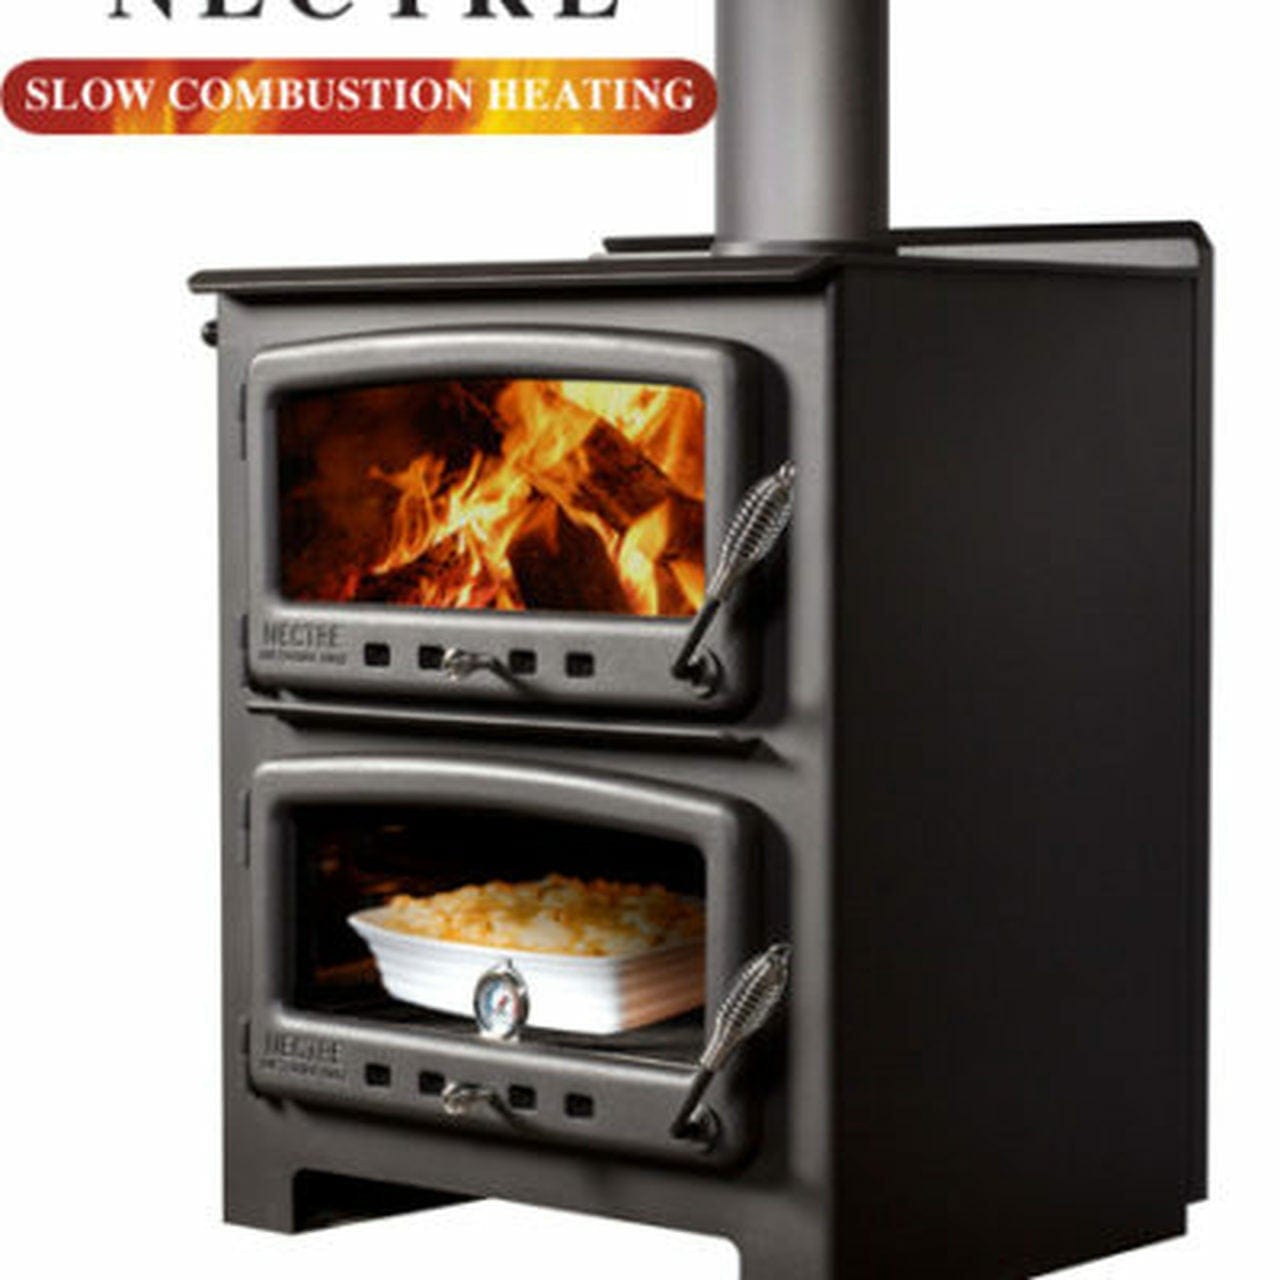 StarWood Fireplaces - Dimplex Wood Stove and Baker's Oven, 65,000 BTU -